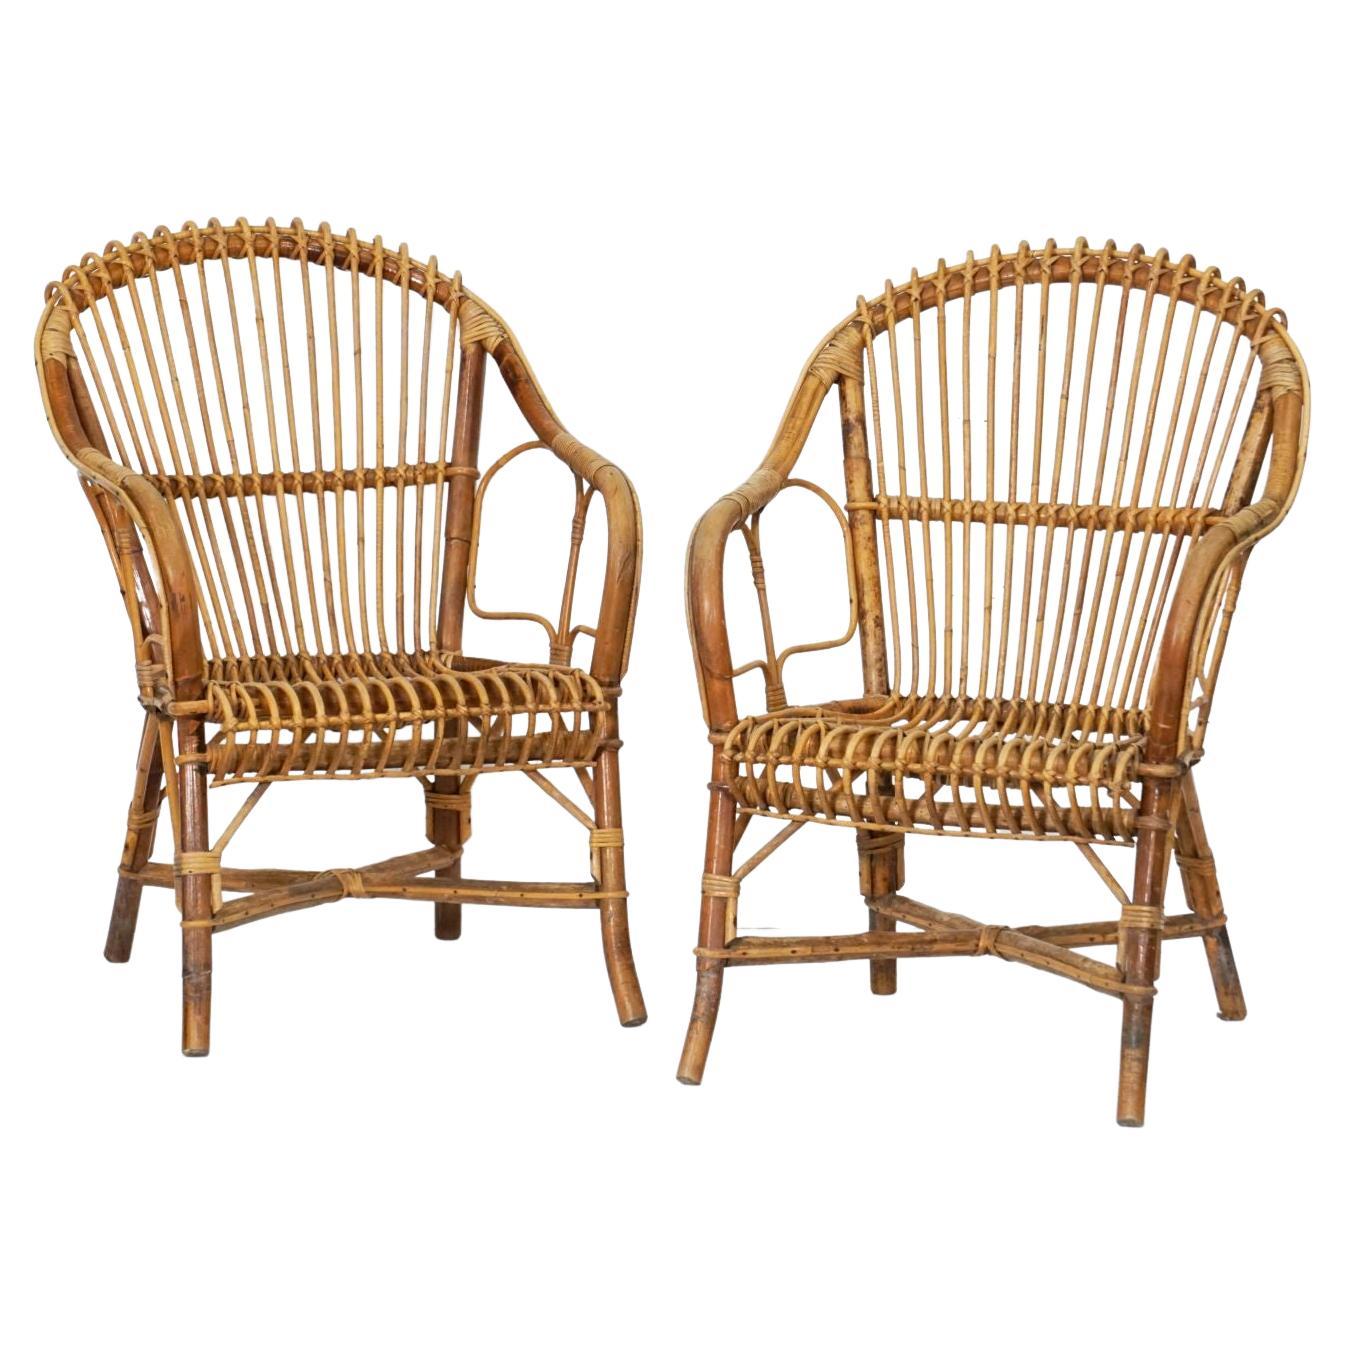 Italian Fan-Backed Arm Chairs of Rattan and Bamboo from the Mid-20th Century For Sale